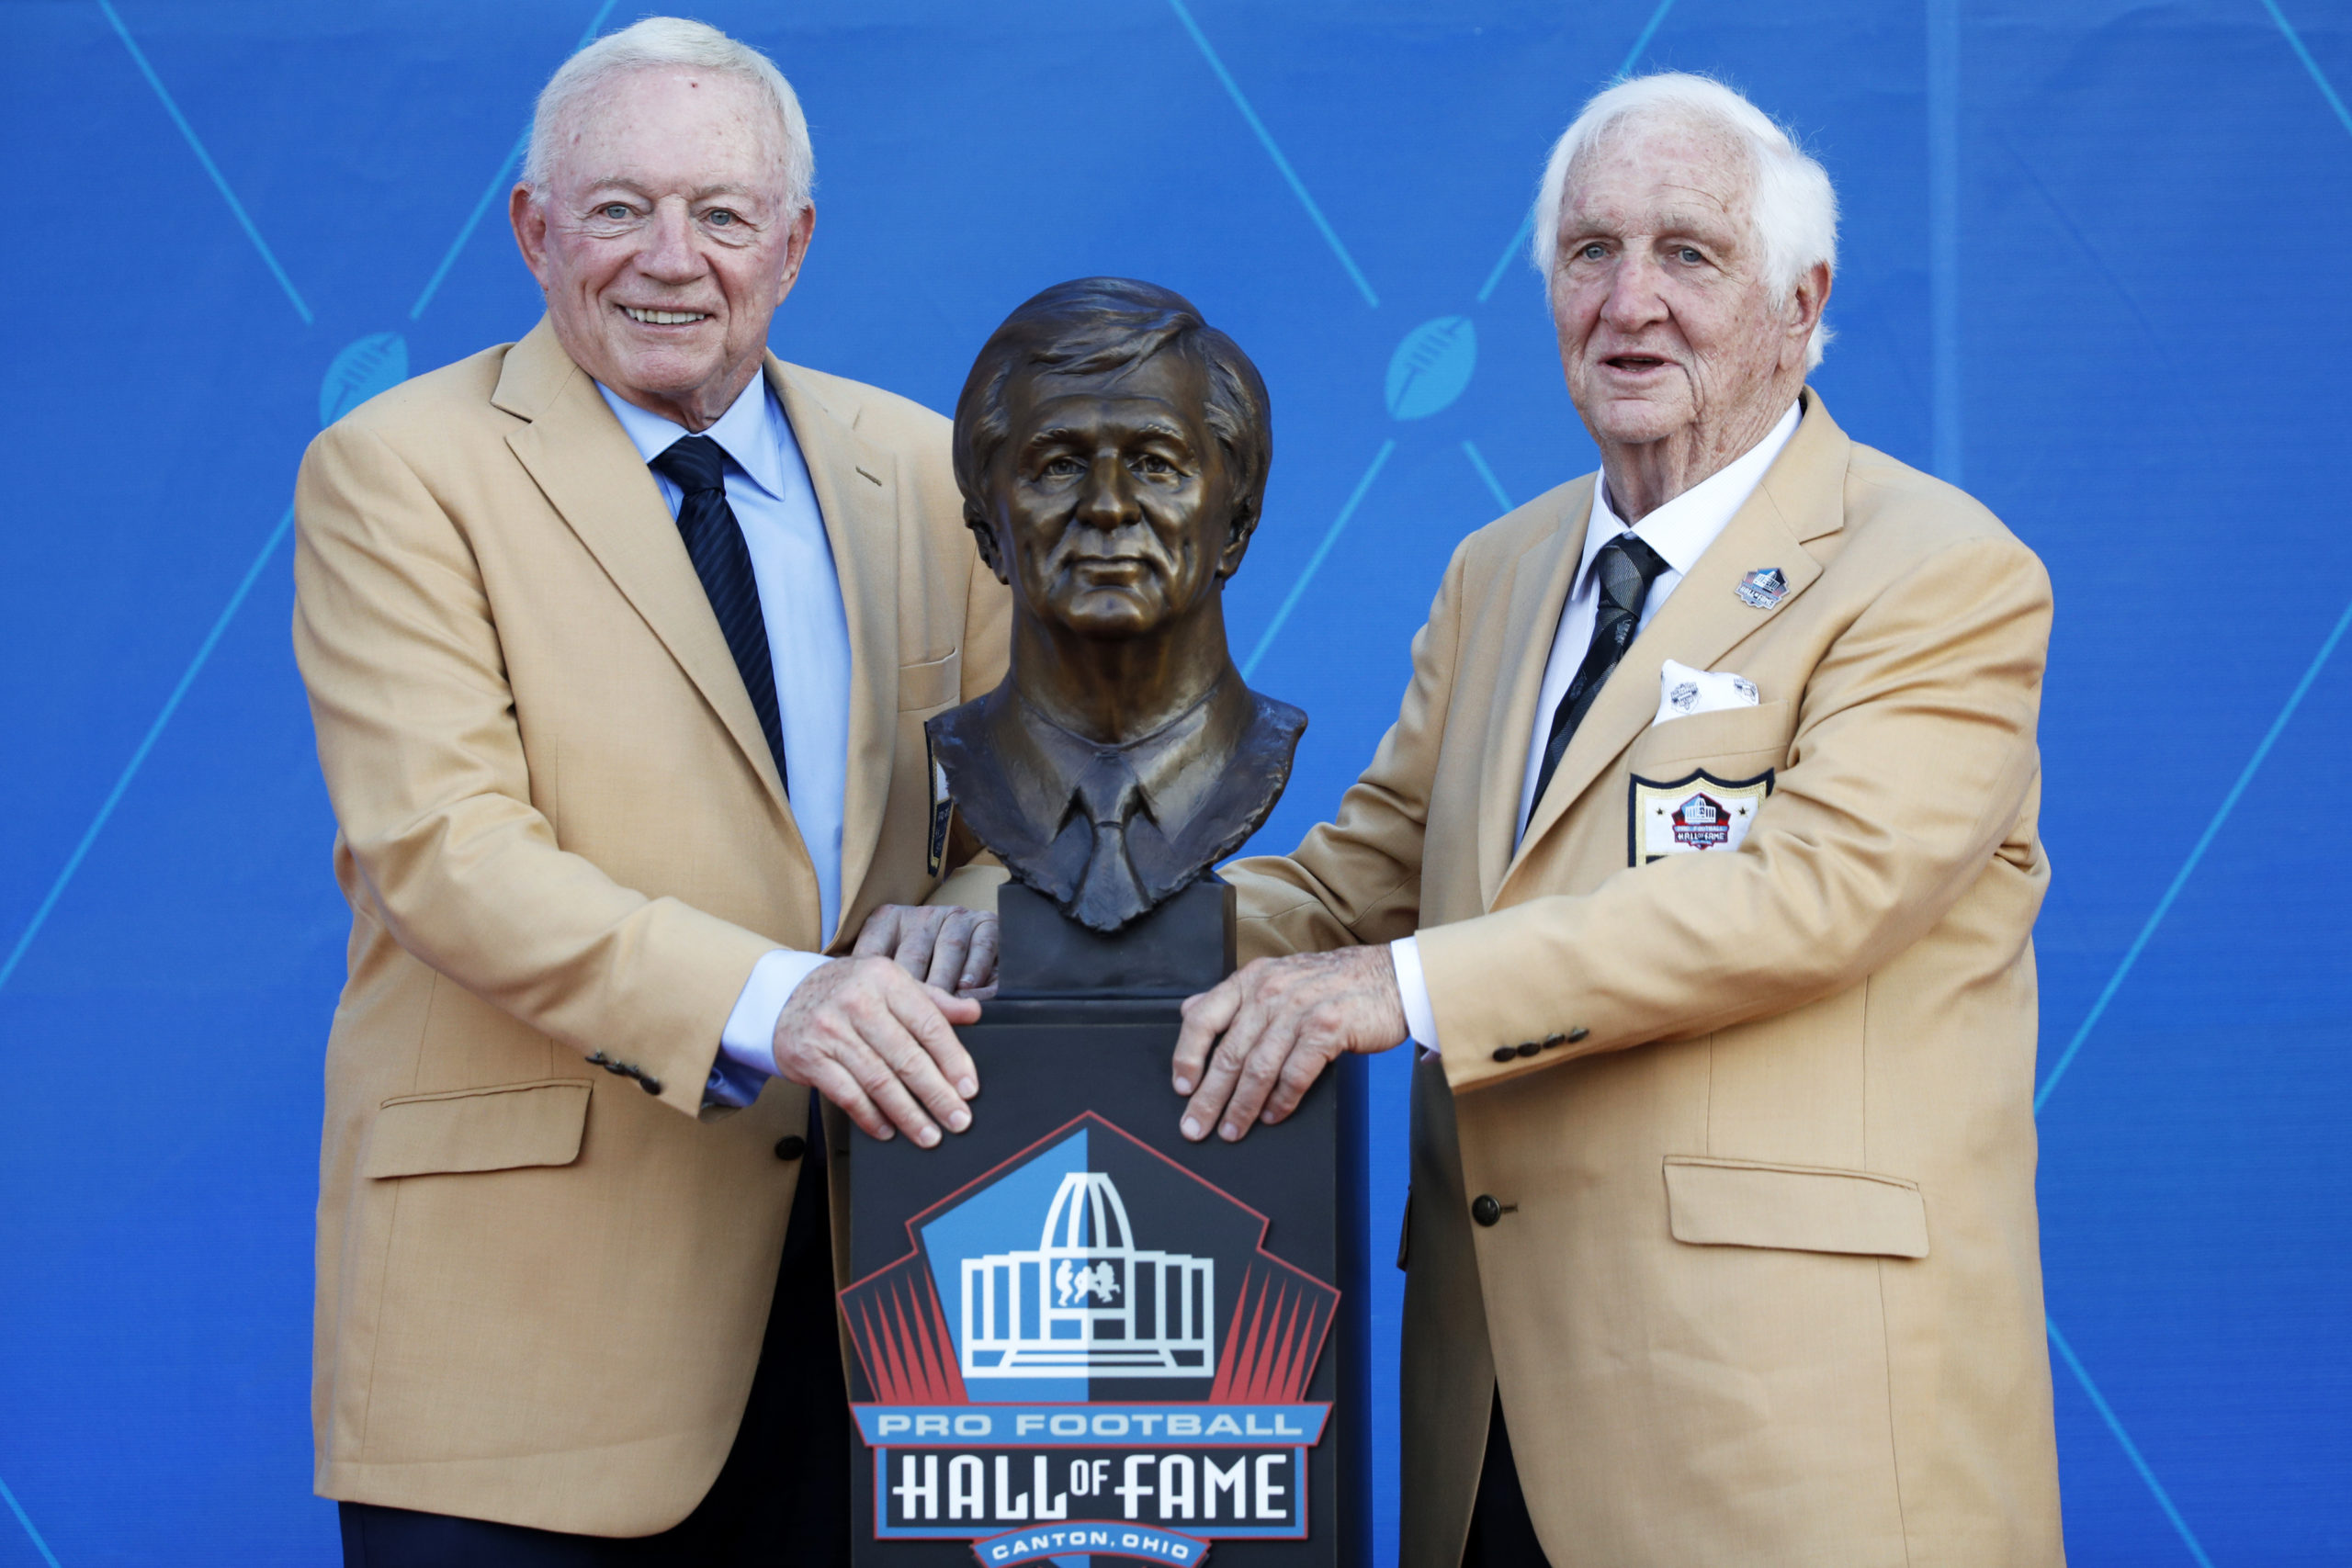 CANTON, OH - AUGUST 03: Gil Brandt with presenter and Dallas Cowboys owner Jerry Jones during Brandt's enshrinement in the Pro Football Hall of Fame at Tom Benson Hall Of Fame Stadium on August 3, 2019 in Canton, Ohio. (Photo by Joe Robbins/Getty Images)